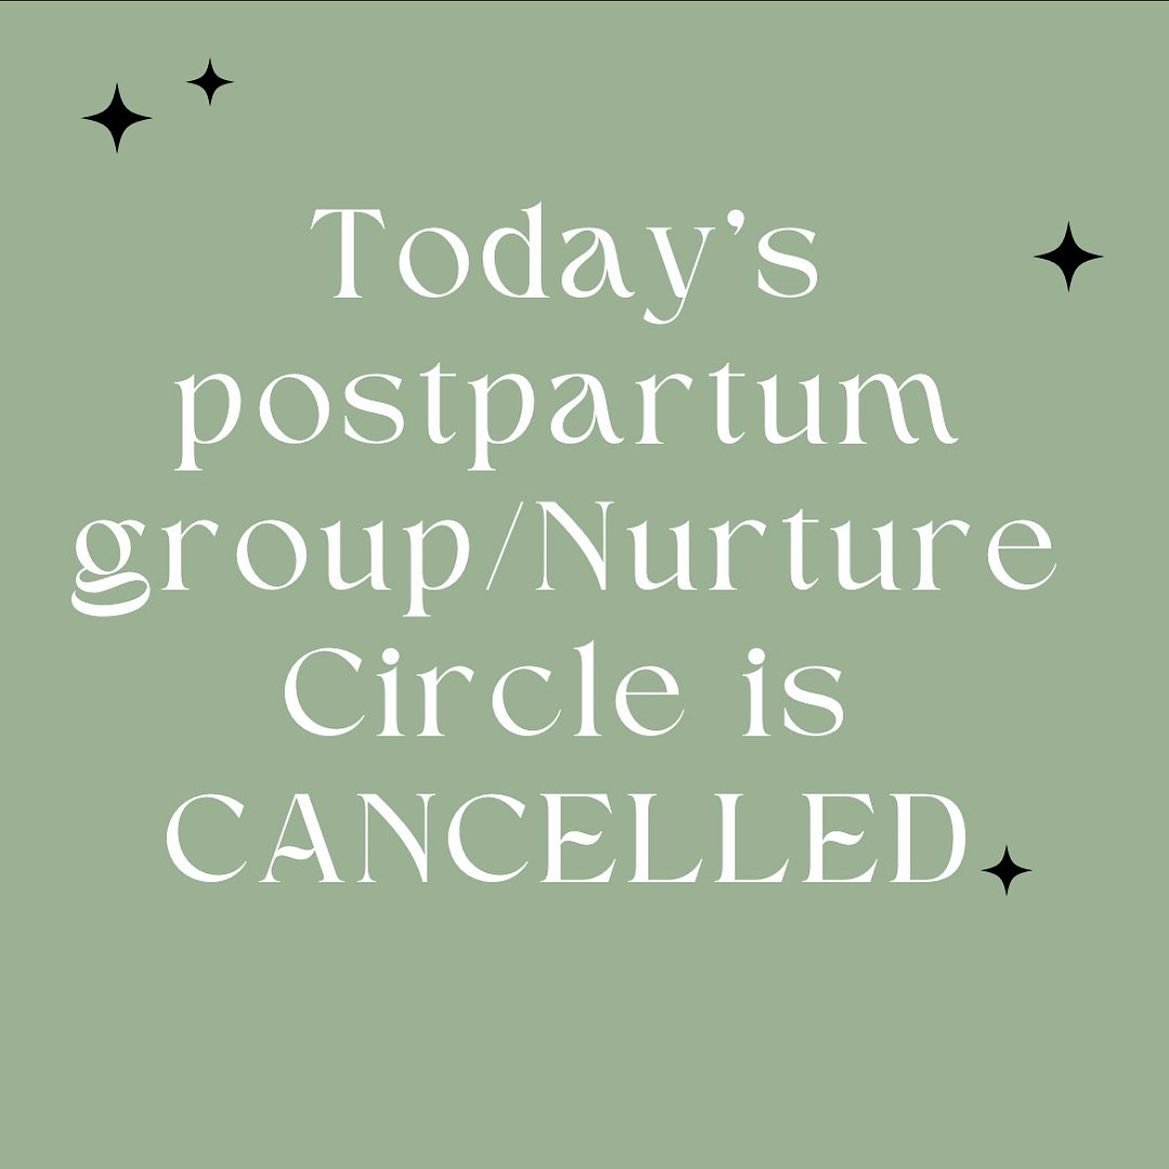 So sorry for the last minute notice, but the Nurture Circle this morning is canceled due to unforeseen circumstances. We will see you next week!